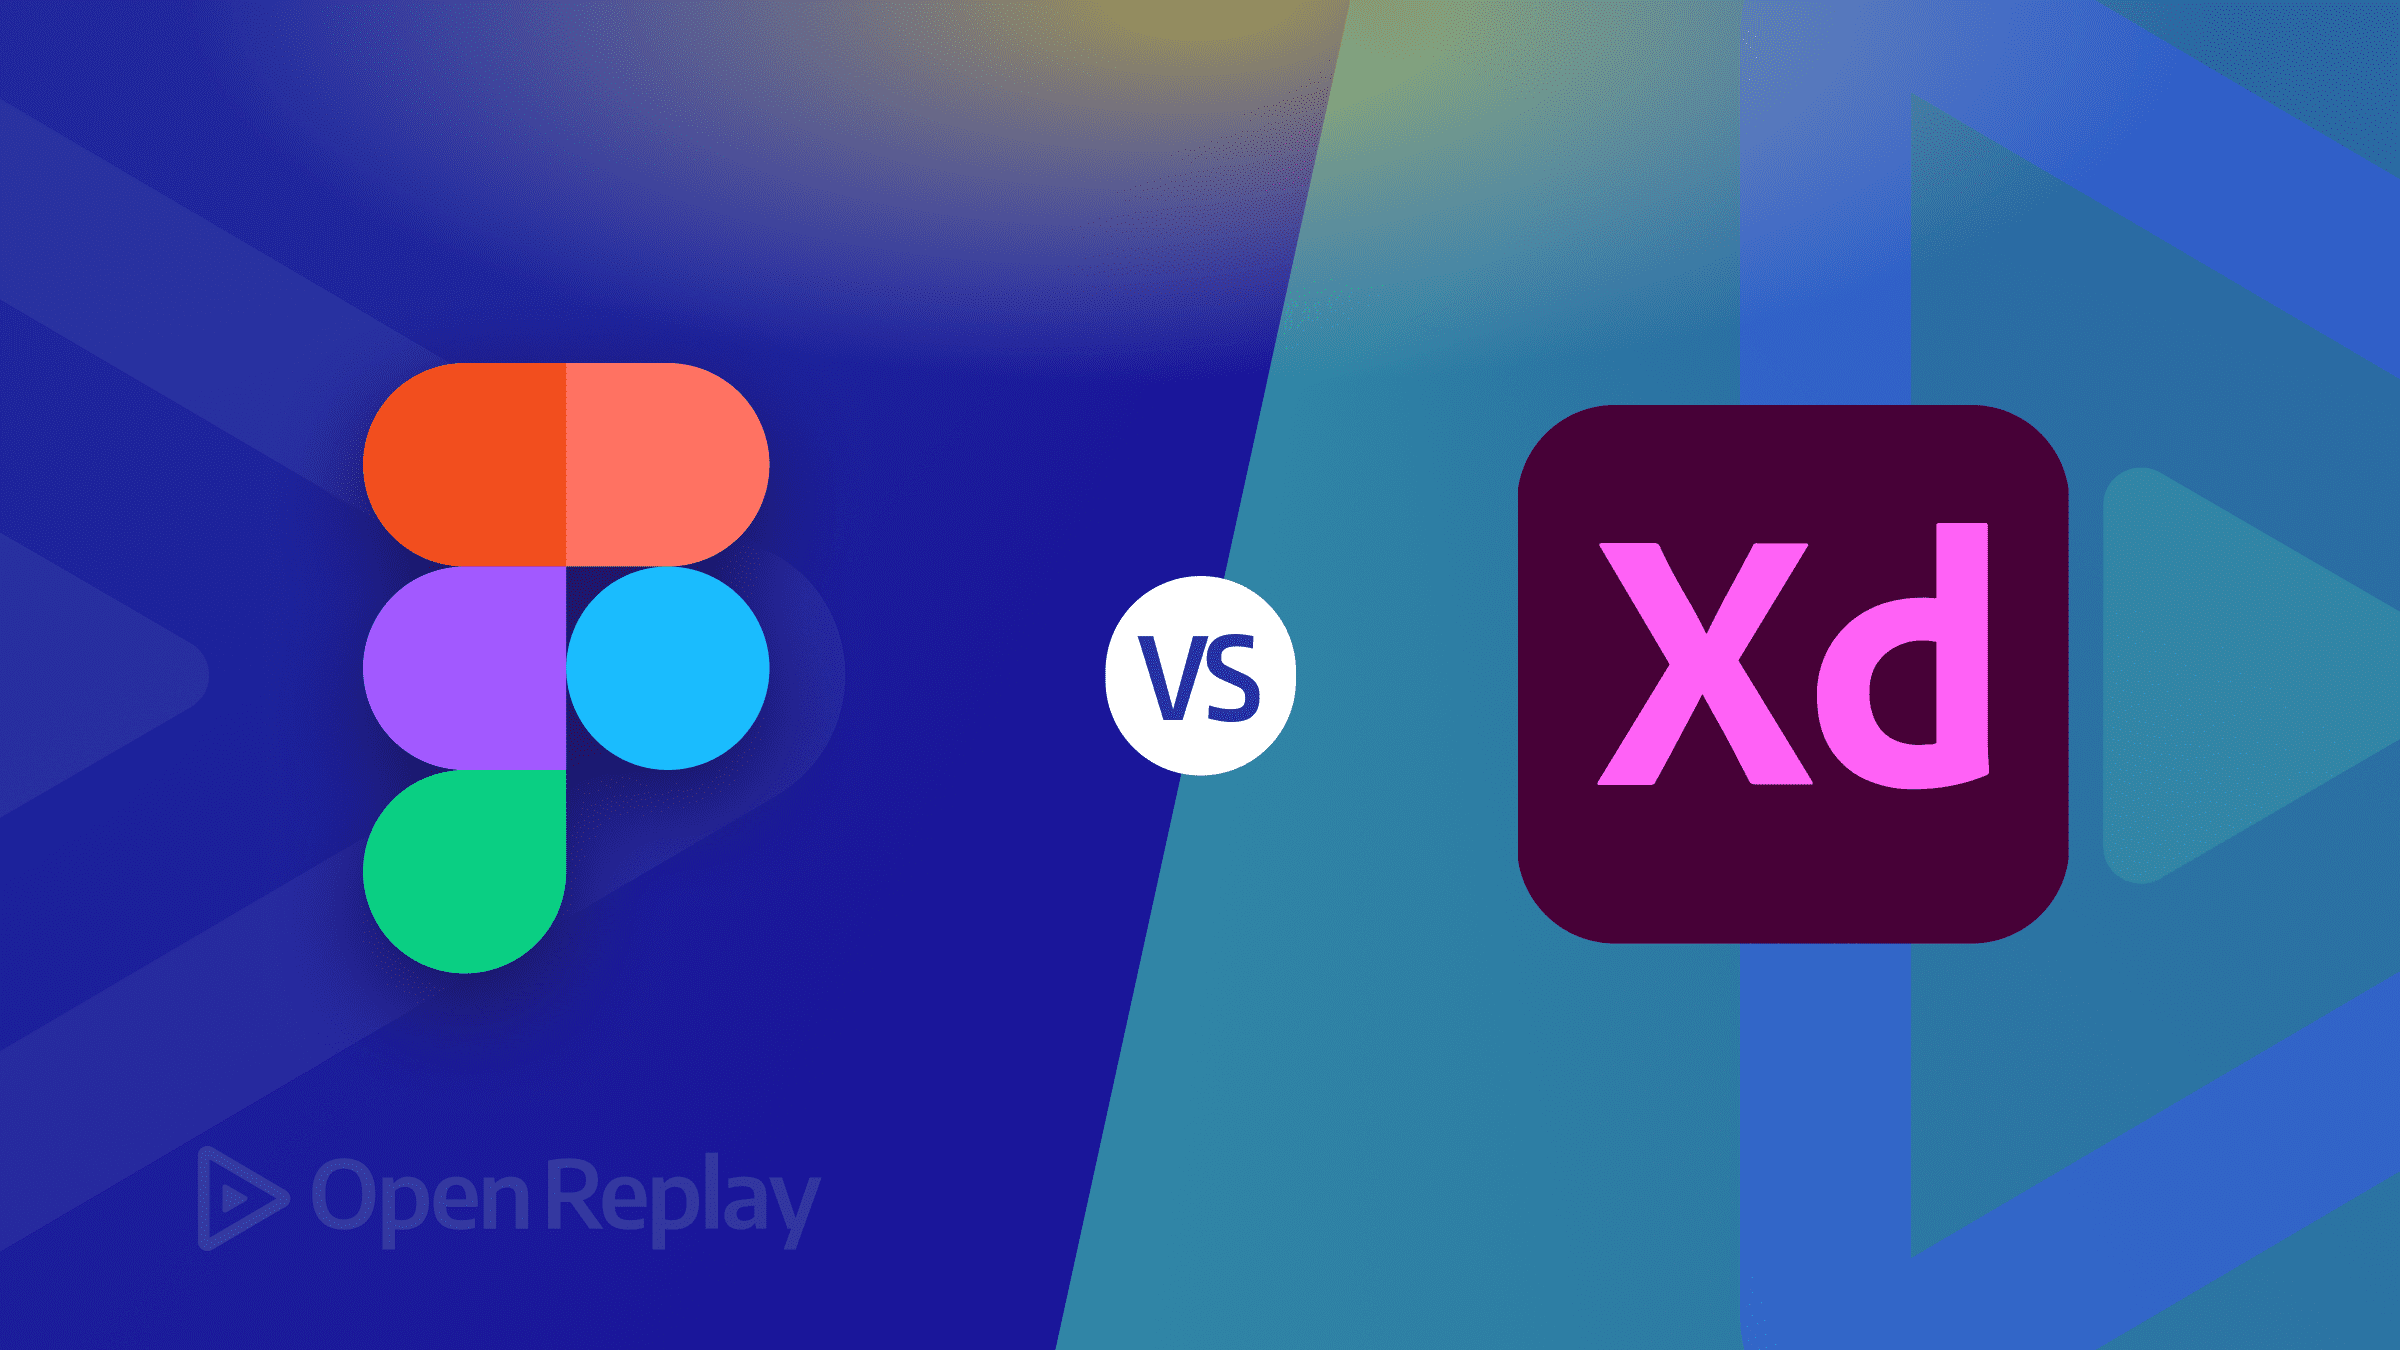 Figma vs. Adobe XD -- which is the better design tool?